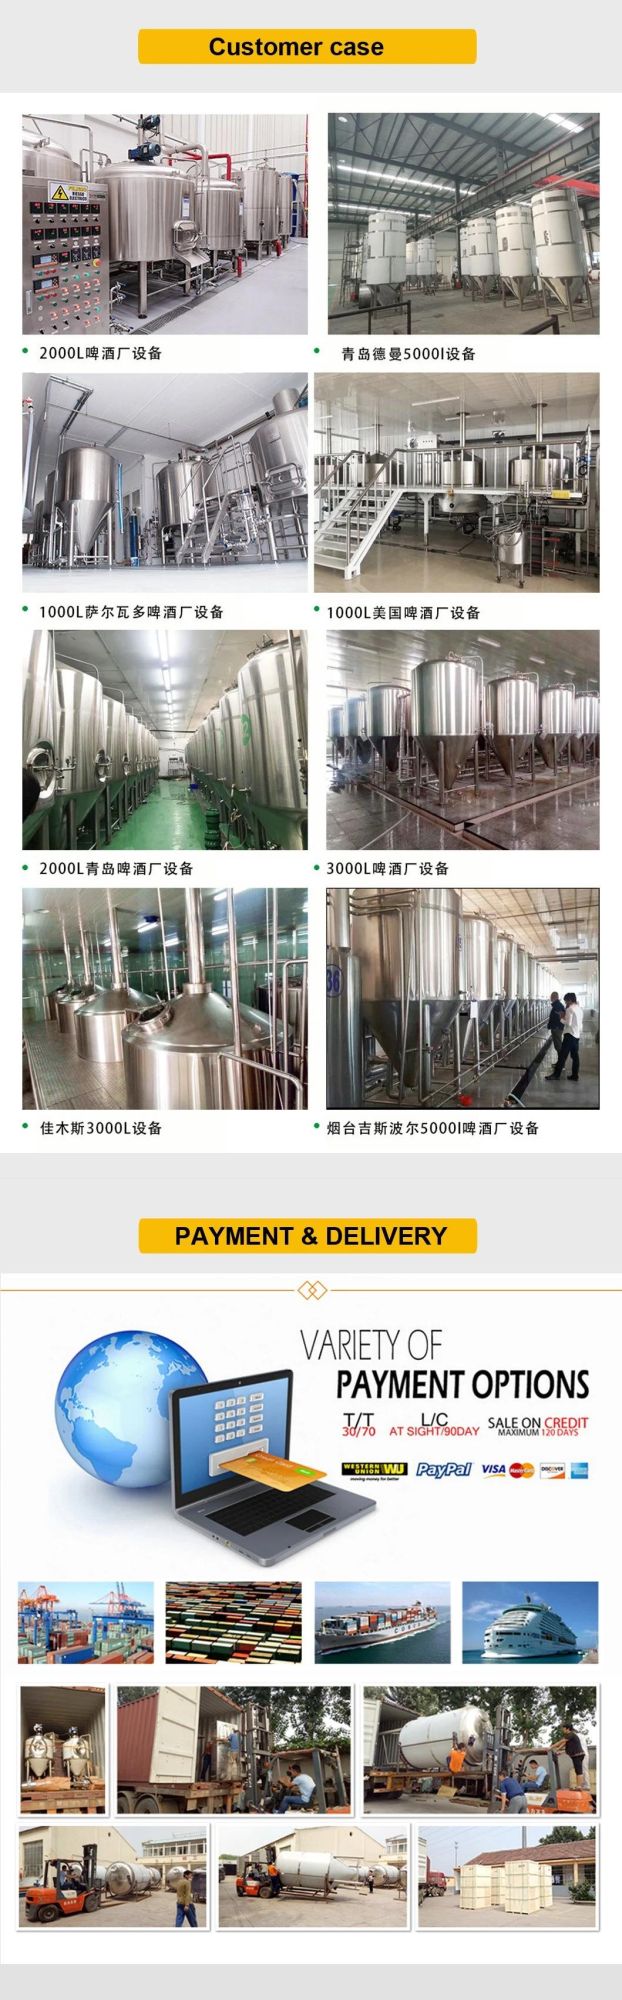 SUS 304 / 316 Beer Brewing Equipment with Digital Display Control